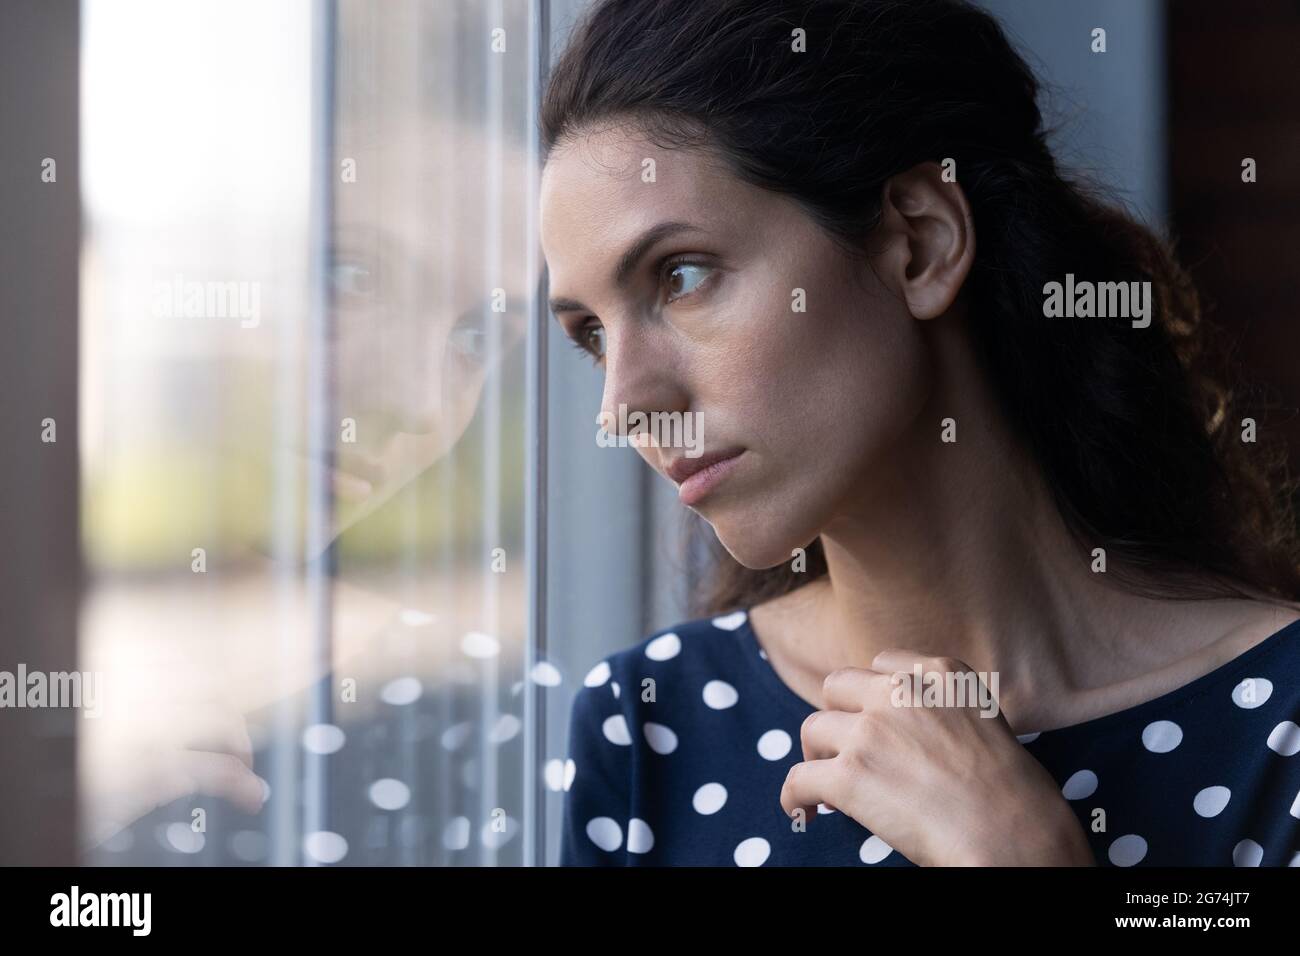 Sad thoughtful Hispanic woman looking out window in deep thought Stock Photo